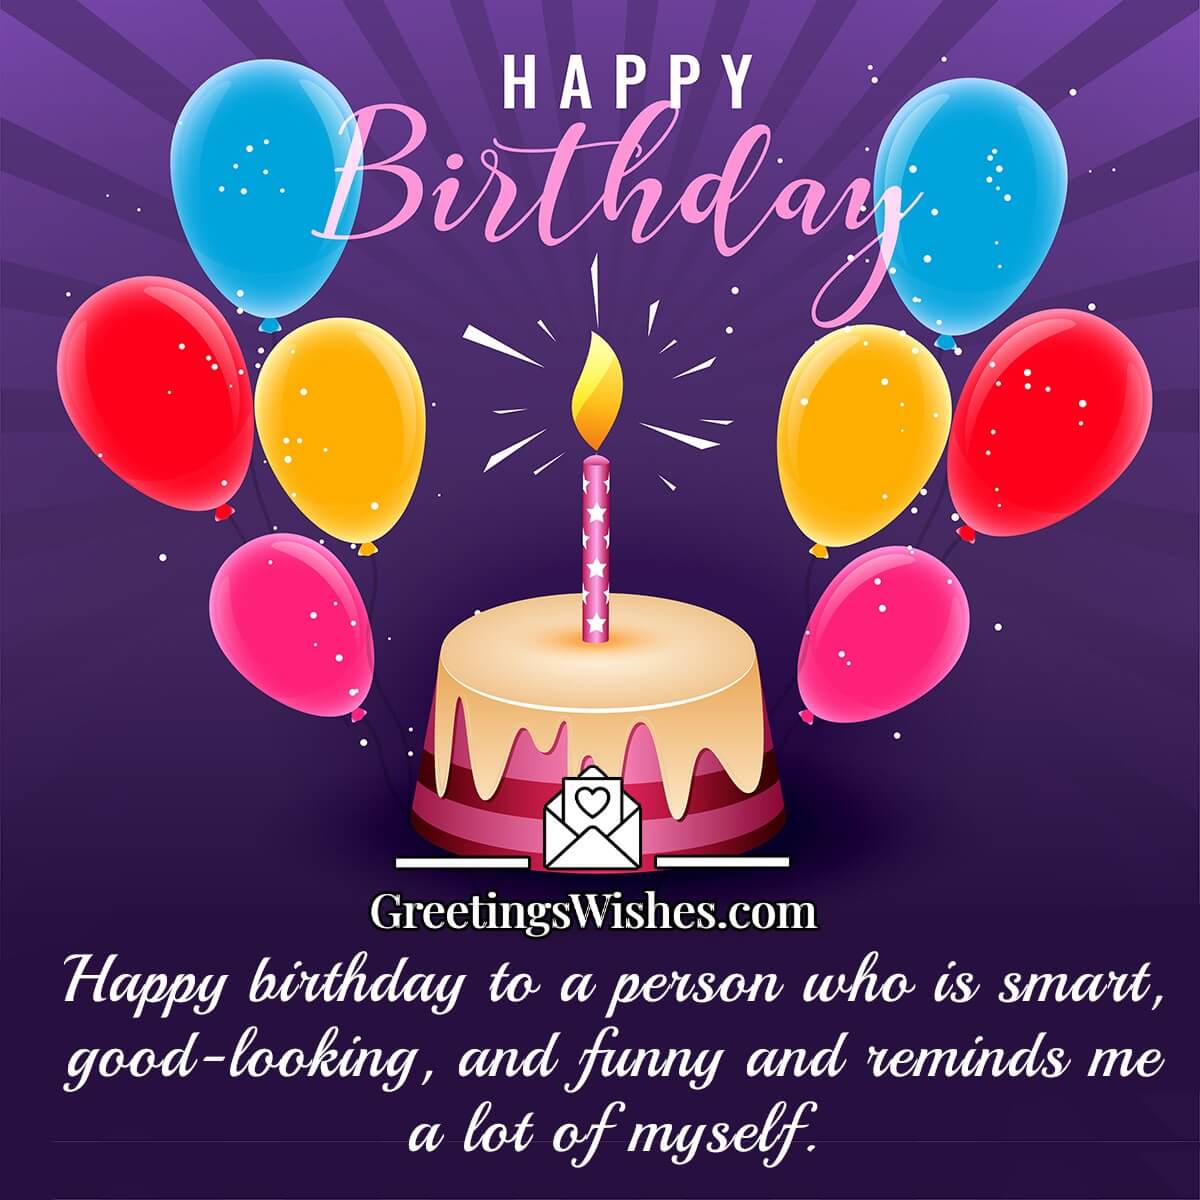 Birthday Wishes For Myself - Greetings Wishes